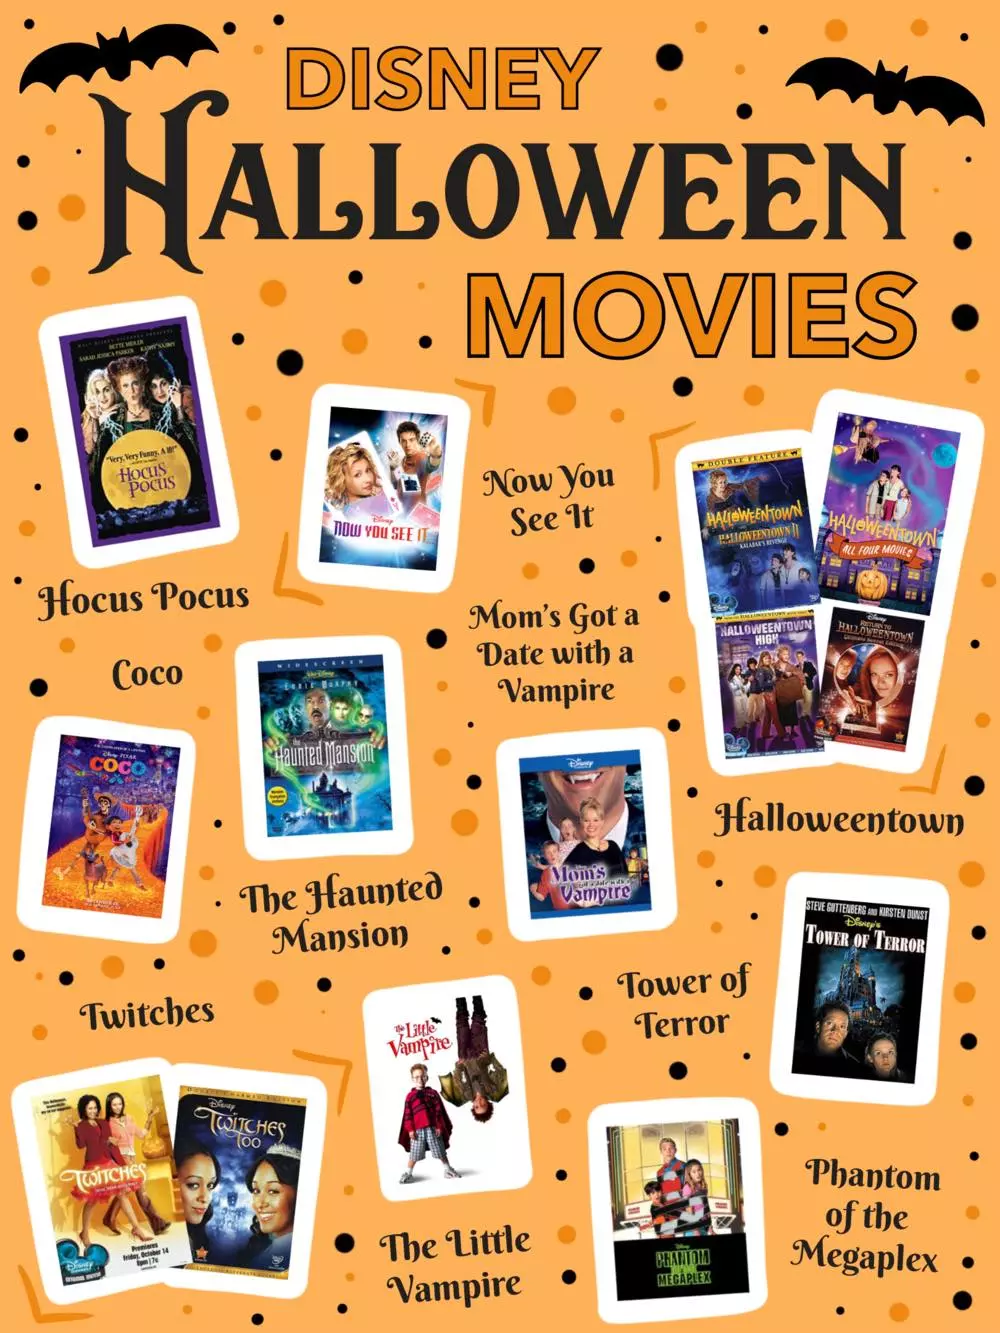 Halloween streaming: where to watch movie online?